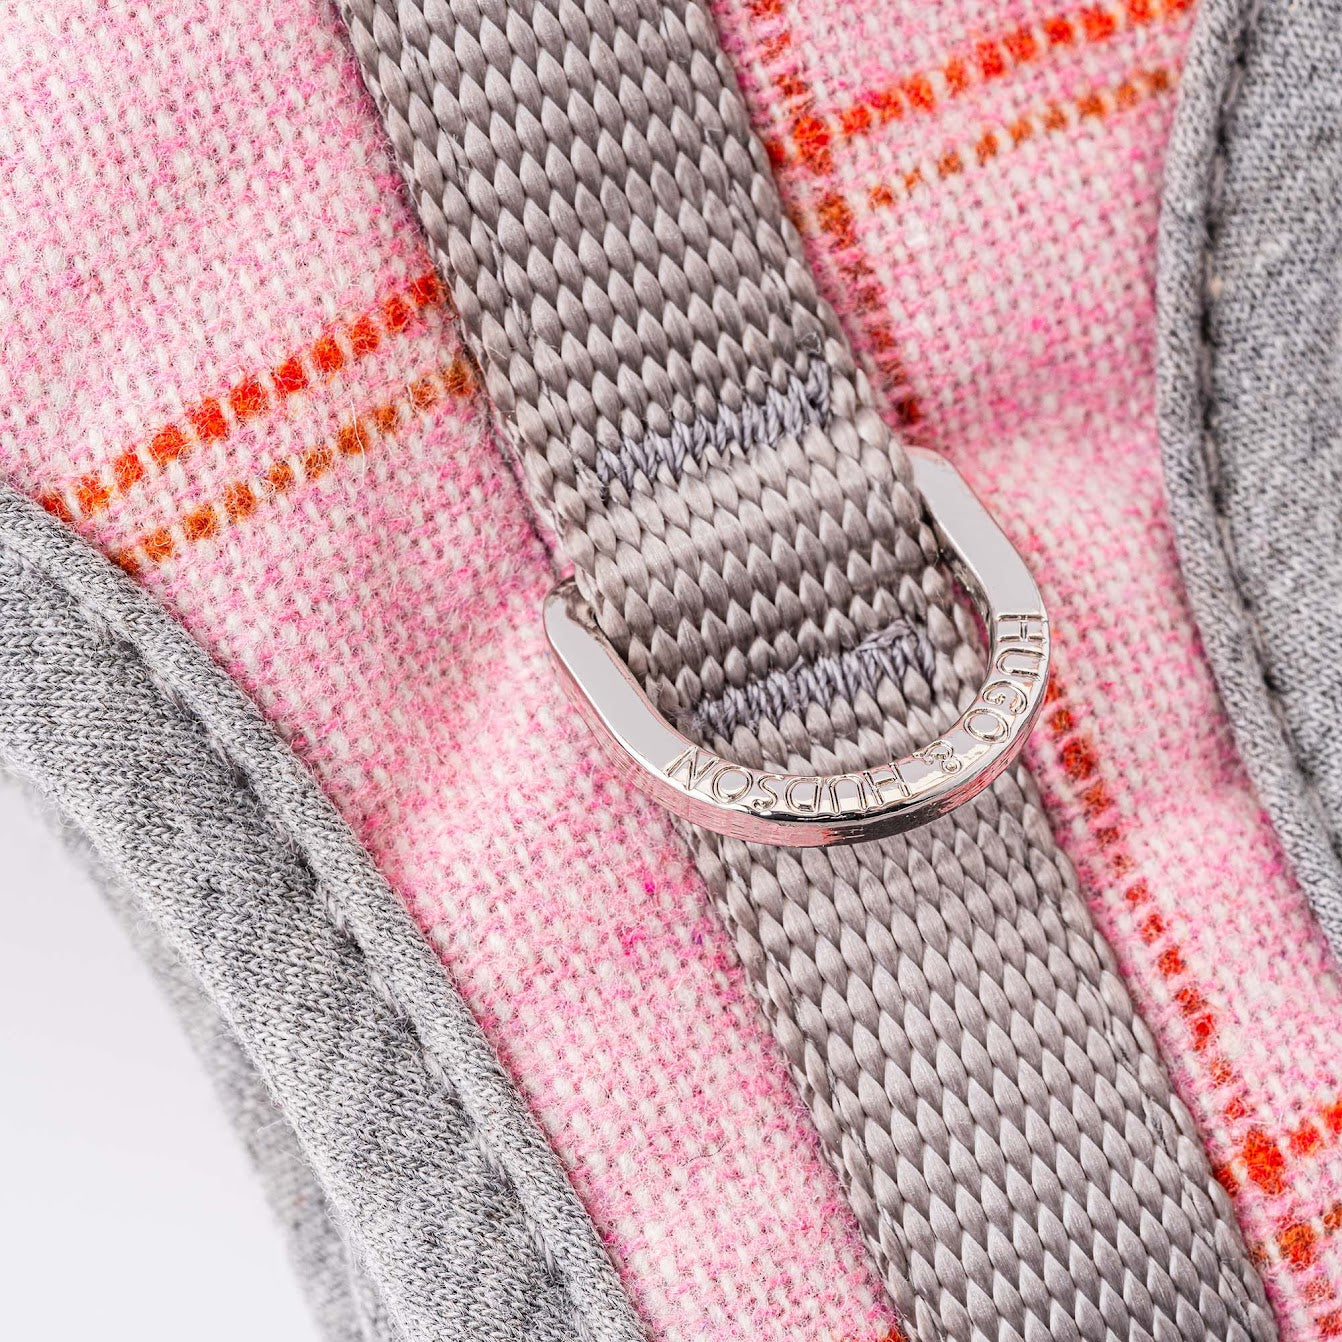 Hugo and Hudson Pink Tweed Harness   The pink dog harnesses are designed to help prevent your dog from pulling, whilst reducing pressure on their neck. The harness is designed so your dog will look and feel great, with four different sizes, that are adjustable , are available to get the perfect fit.  Complete the pink checked set with the lead, collar and checked herringbone tweed jacket.